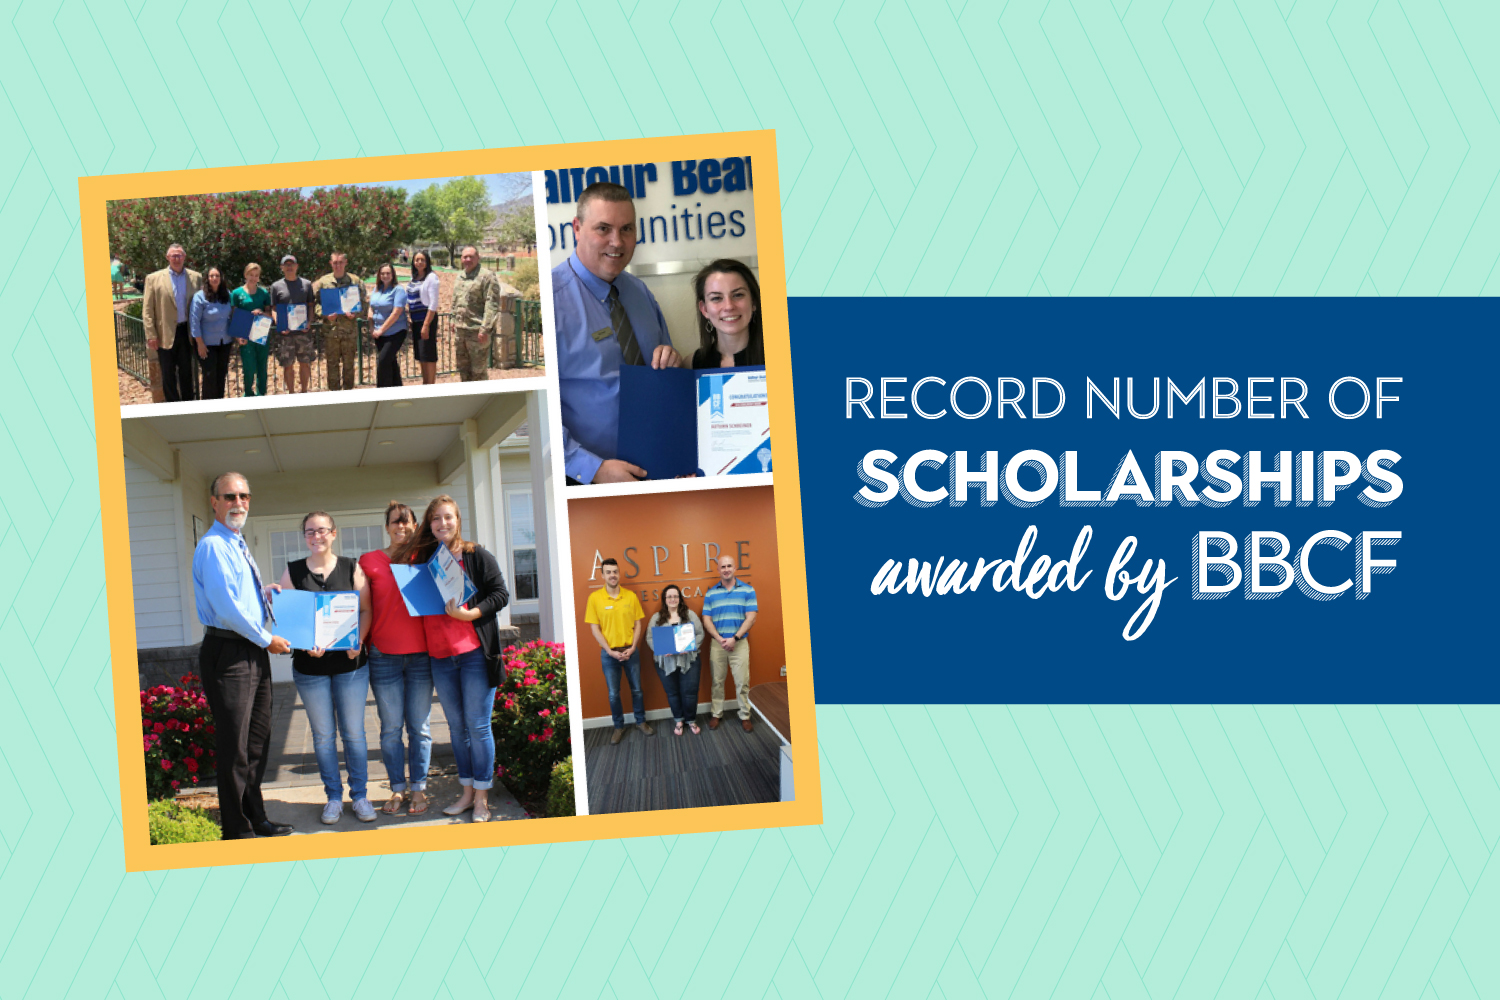 Record number of scholarships awarded by Balfour Beatty Communities Foundation